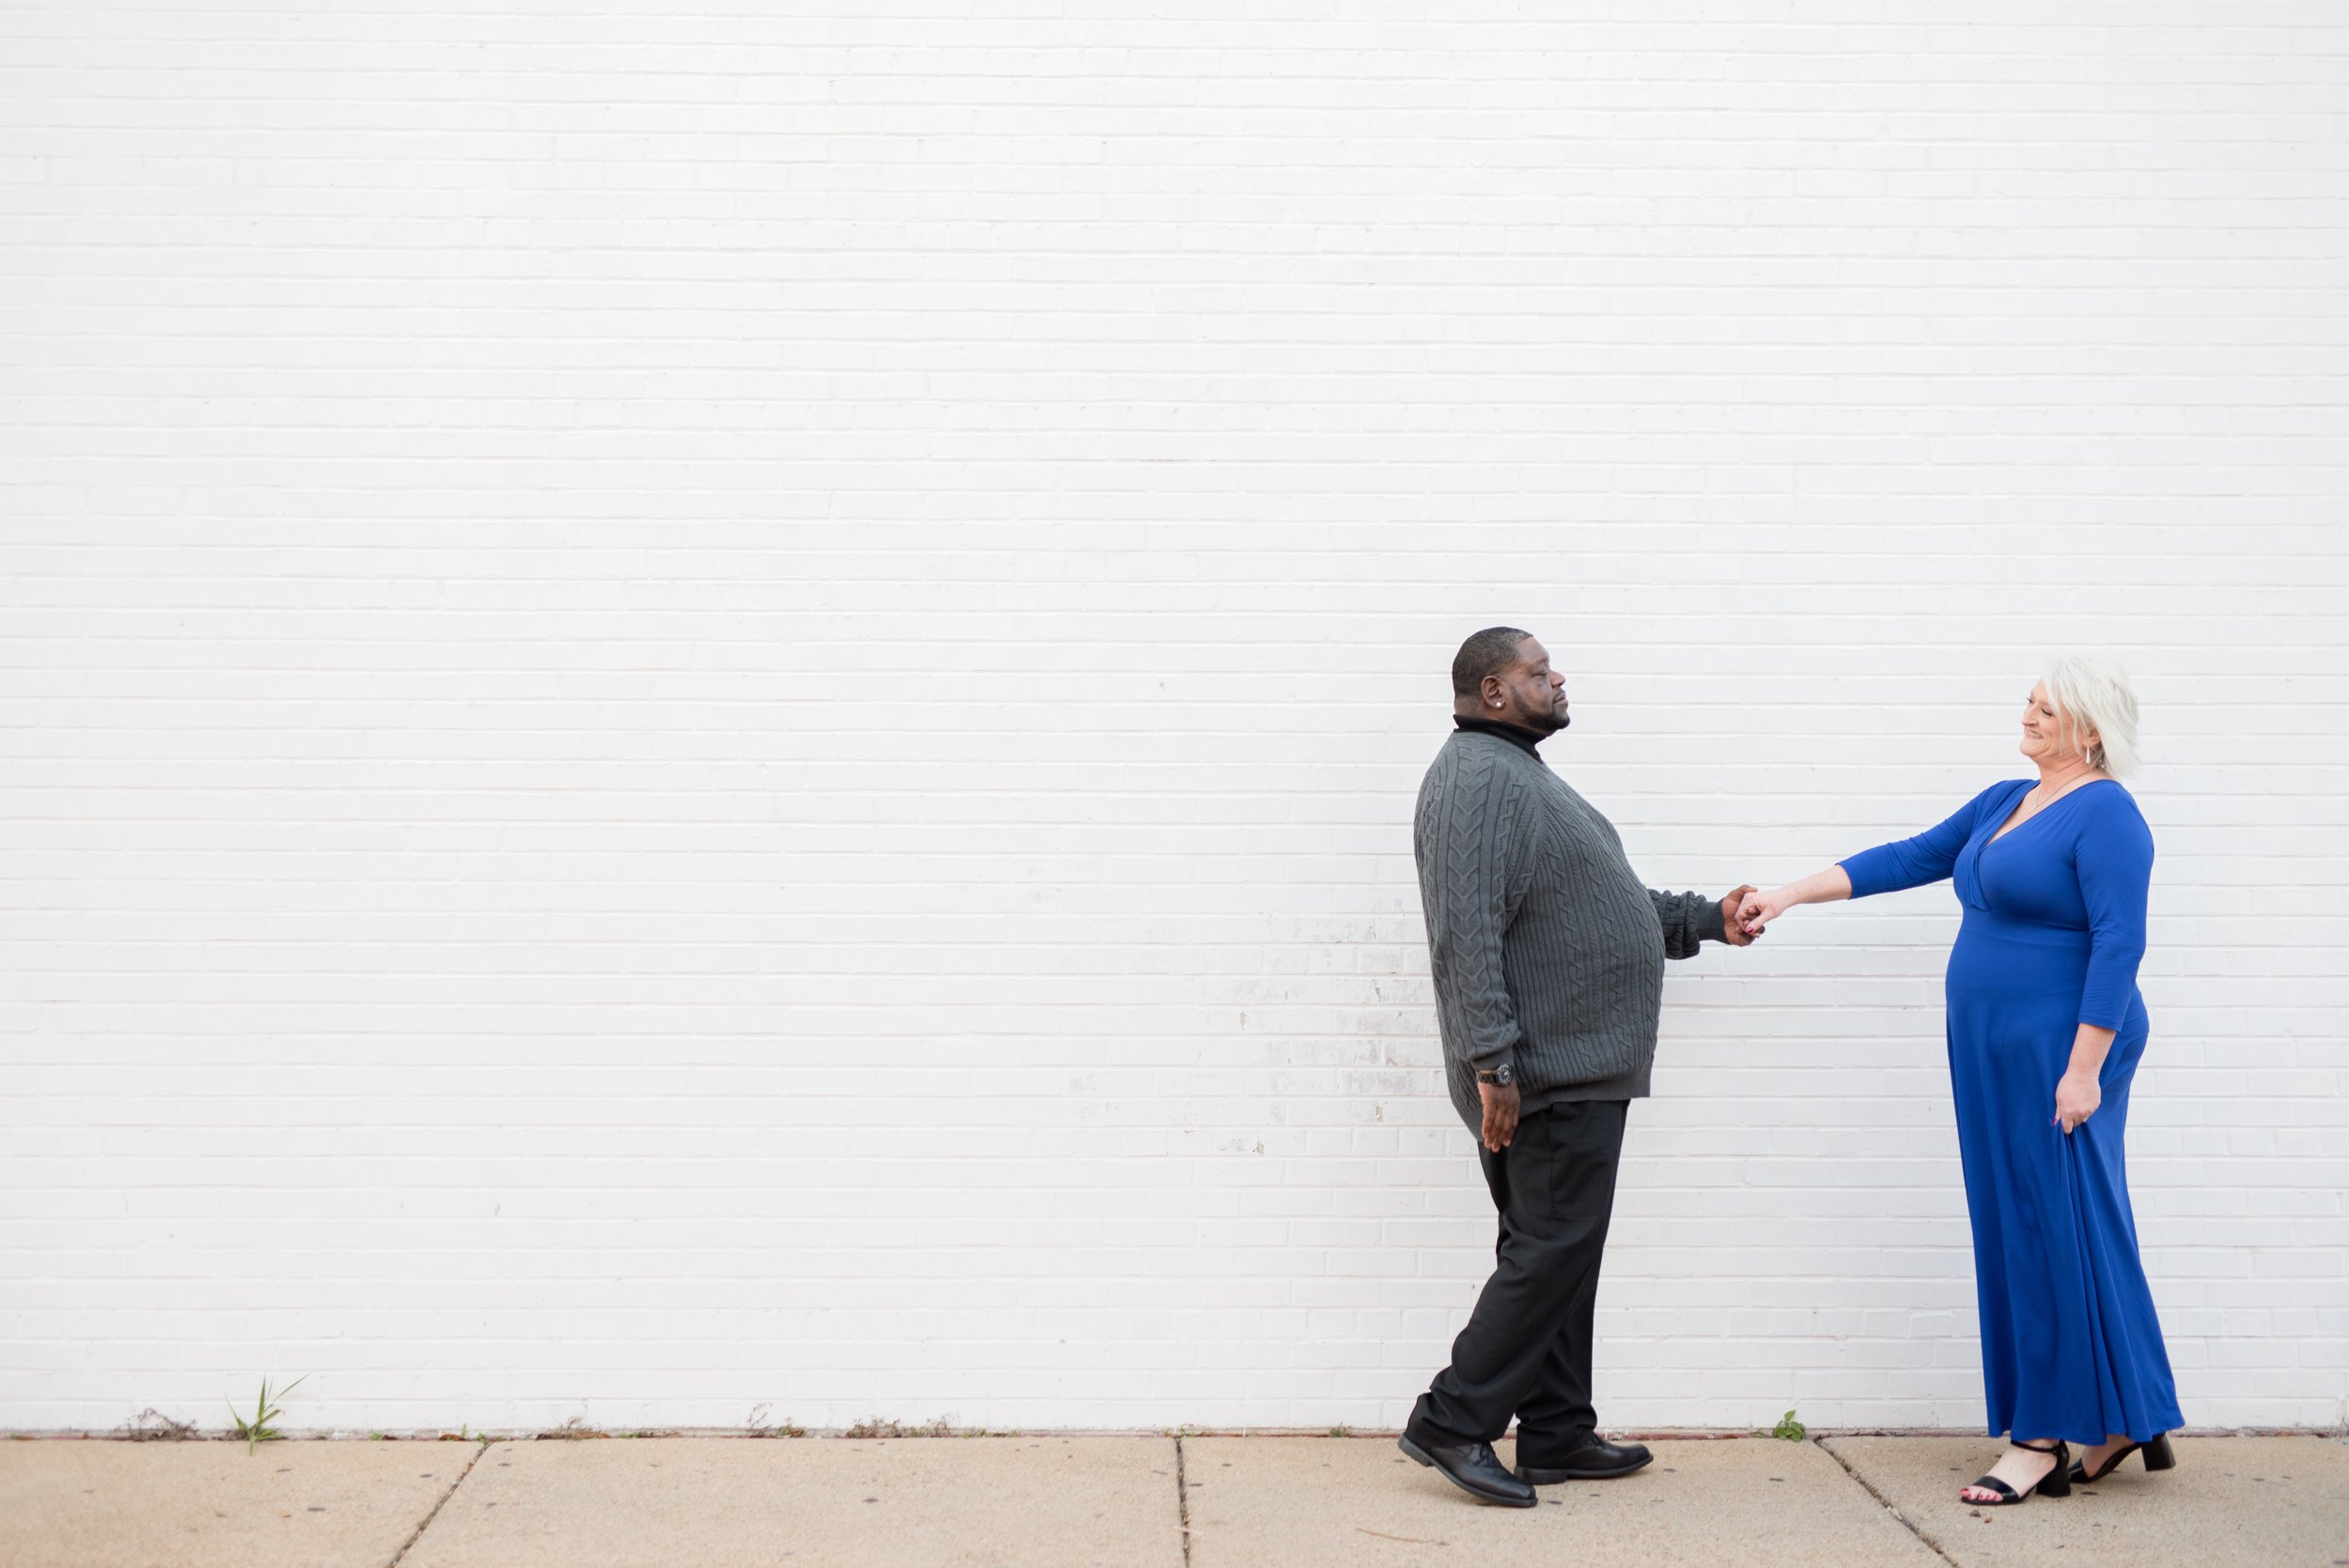 Downtown Mobile Alabama (AL) Engagement Session Photographed by Kristen Marcus Photography